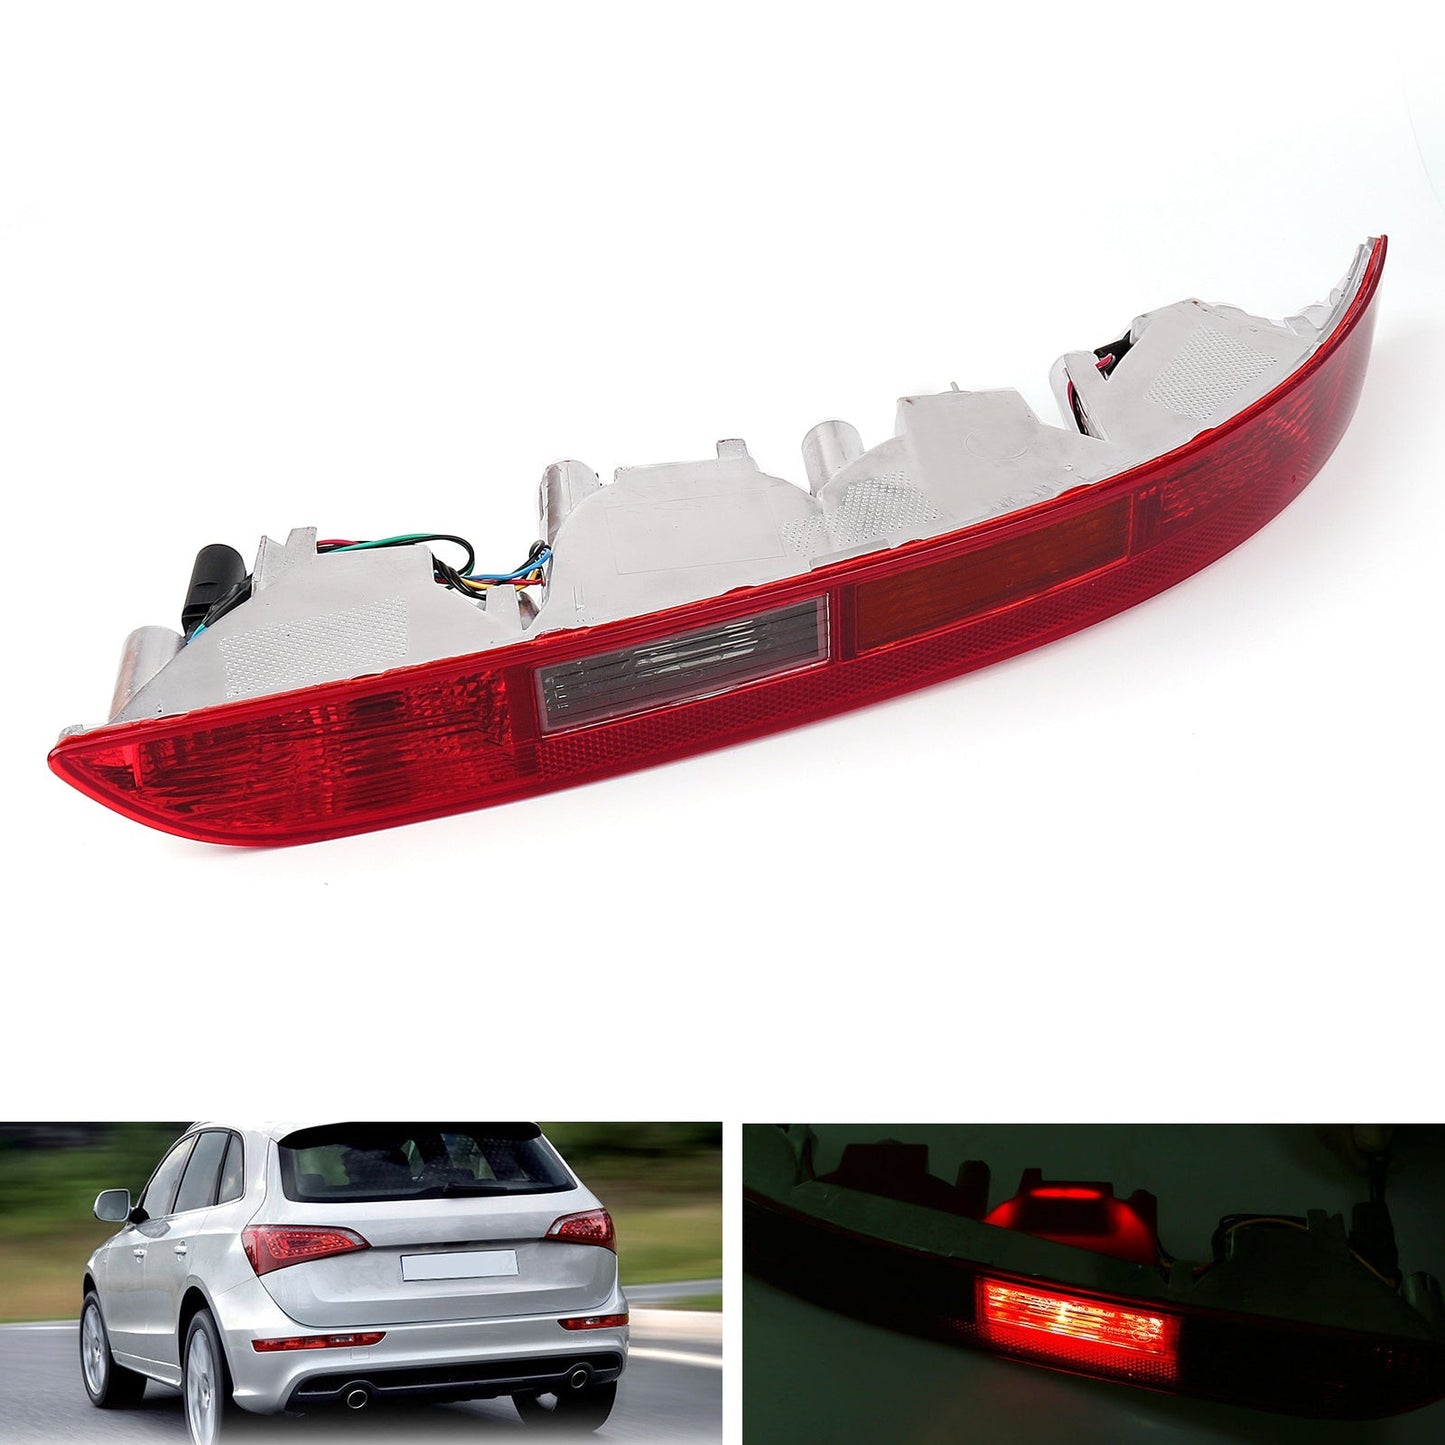 2009-2015 Audi Q5 Left/Right Lower Tail light Lamp Rear Reverse Bumper Light with 4 bulbs